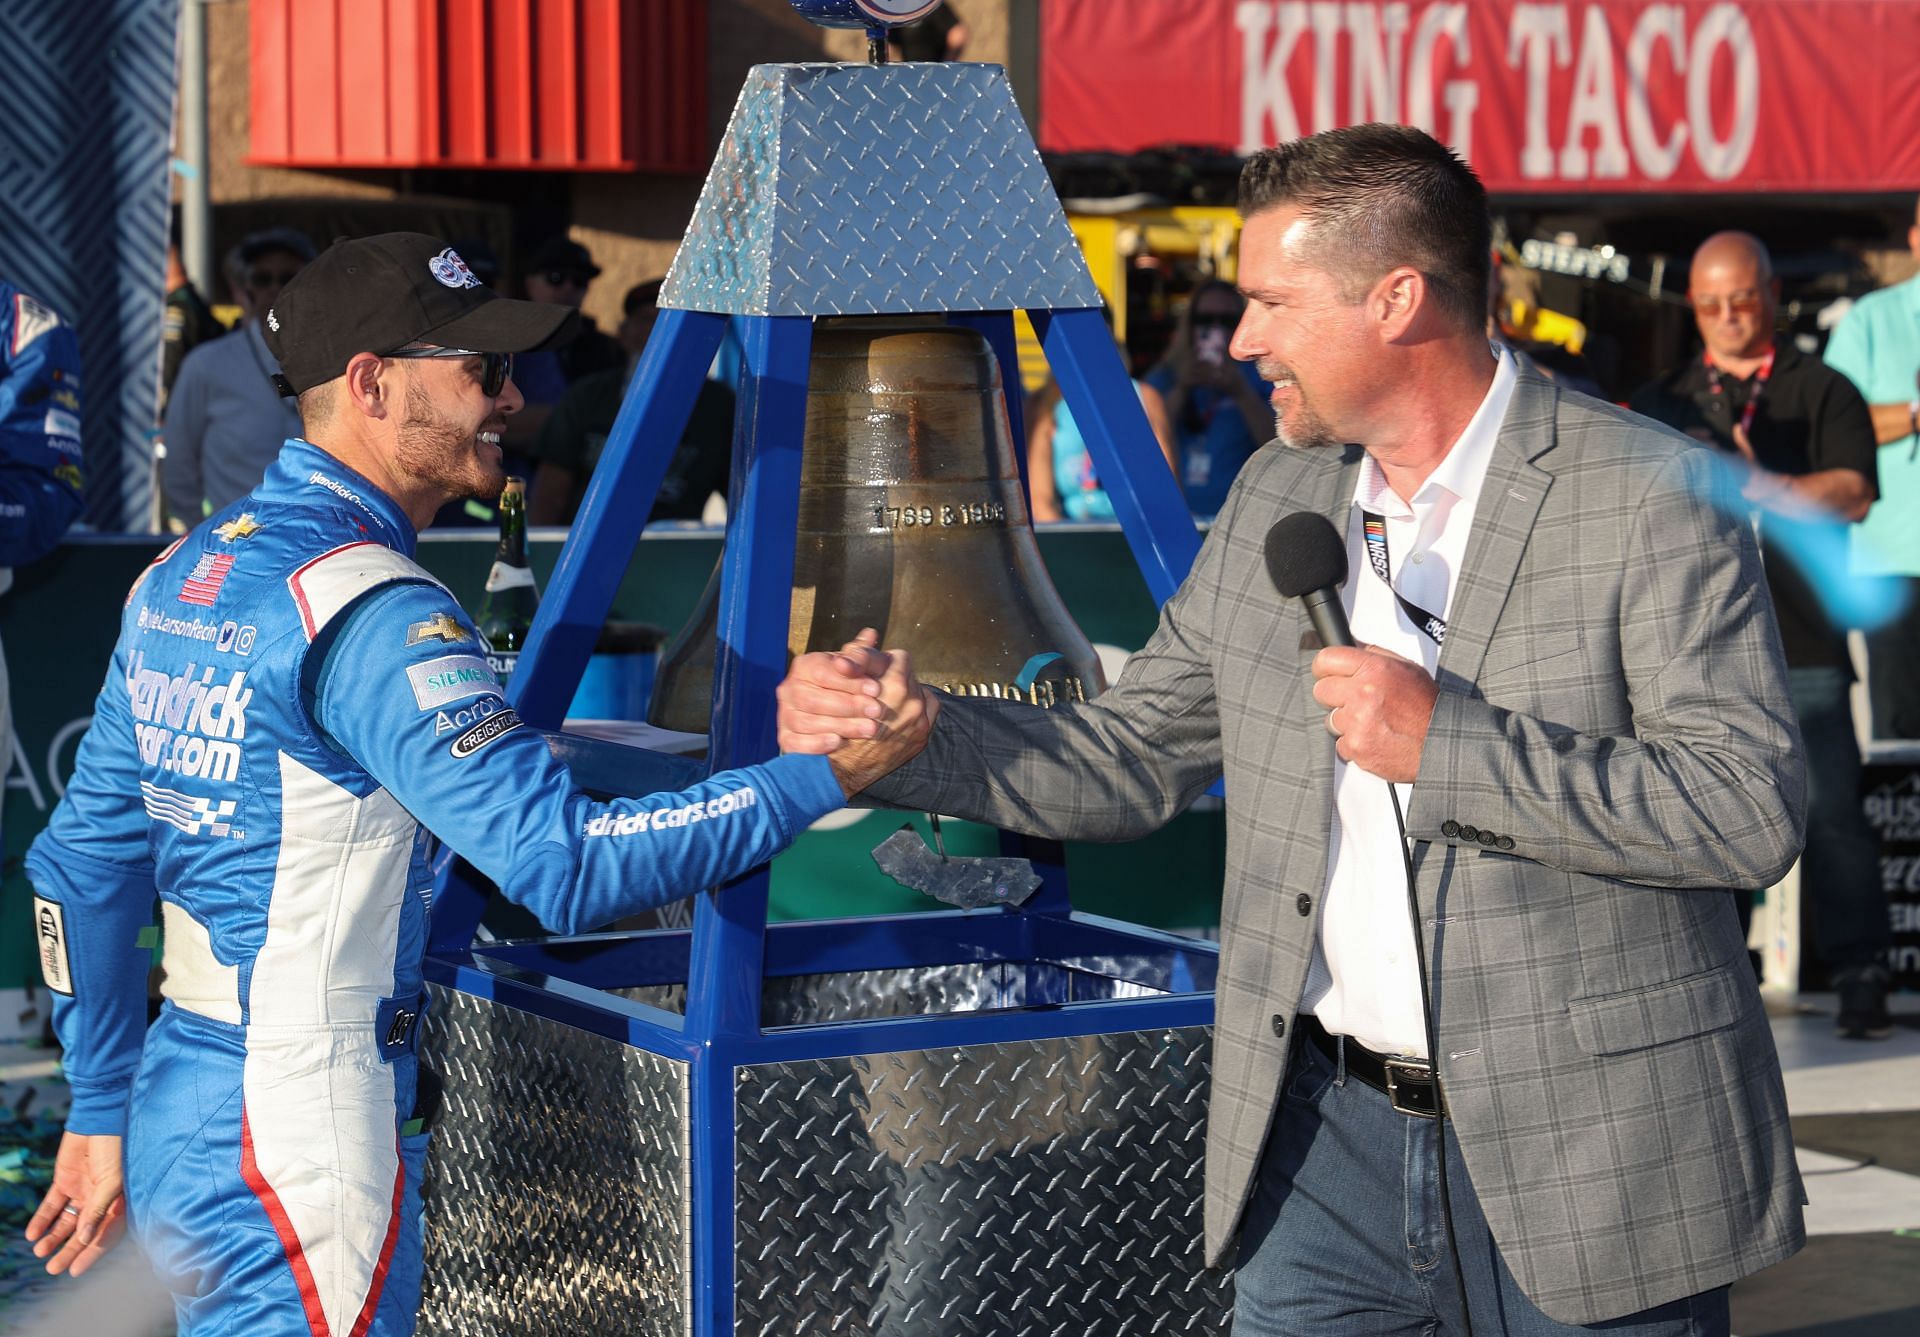 Kyle Larson is congratulated by Dave Allen, President of the Auto Club Speedway, after the former&#039;s victory at the NASCAR Cup Series WISE Power 400